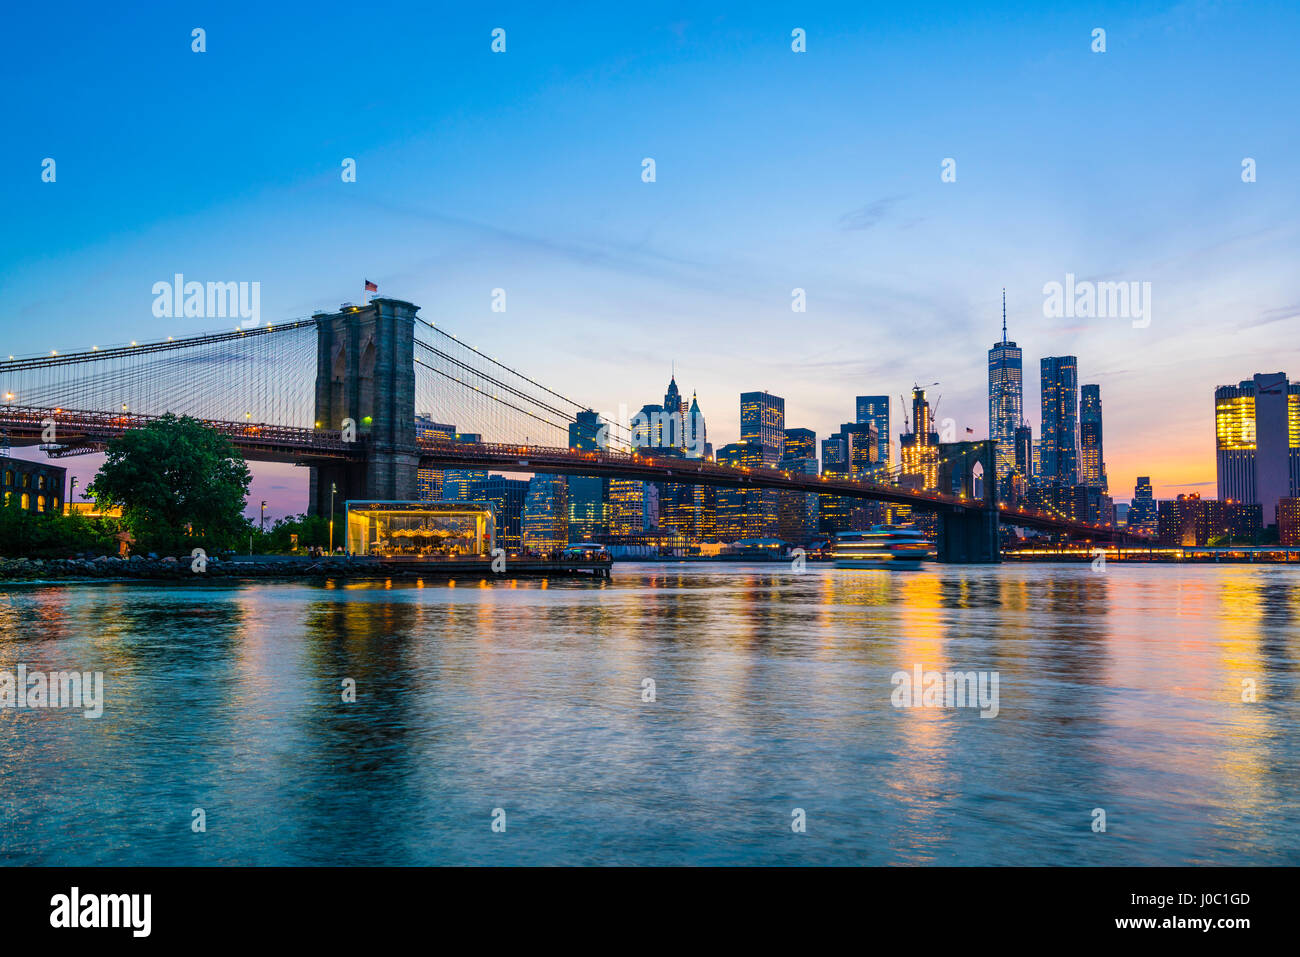 Brooklyn Bridge and Manhattan skyline at dusk, viewed from the East River, New York City, USA Stock Photo